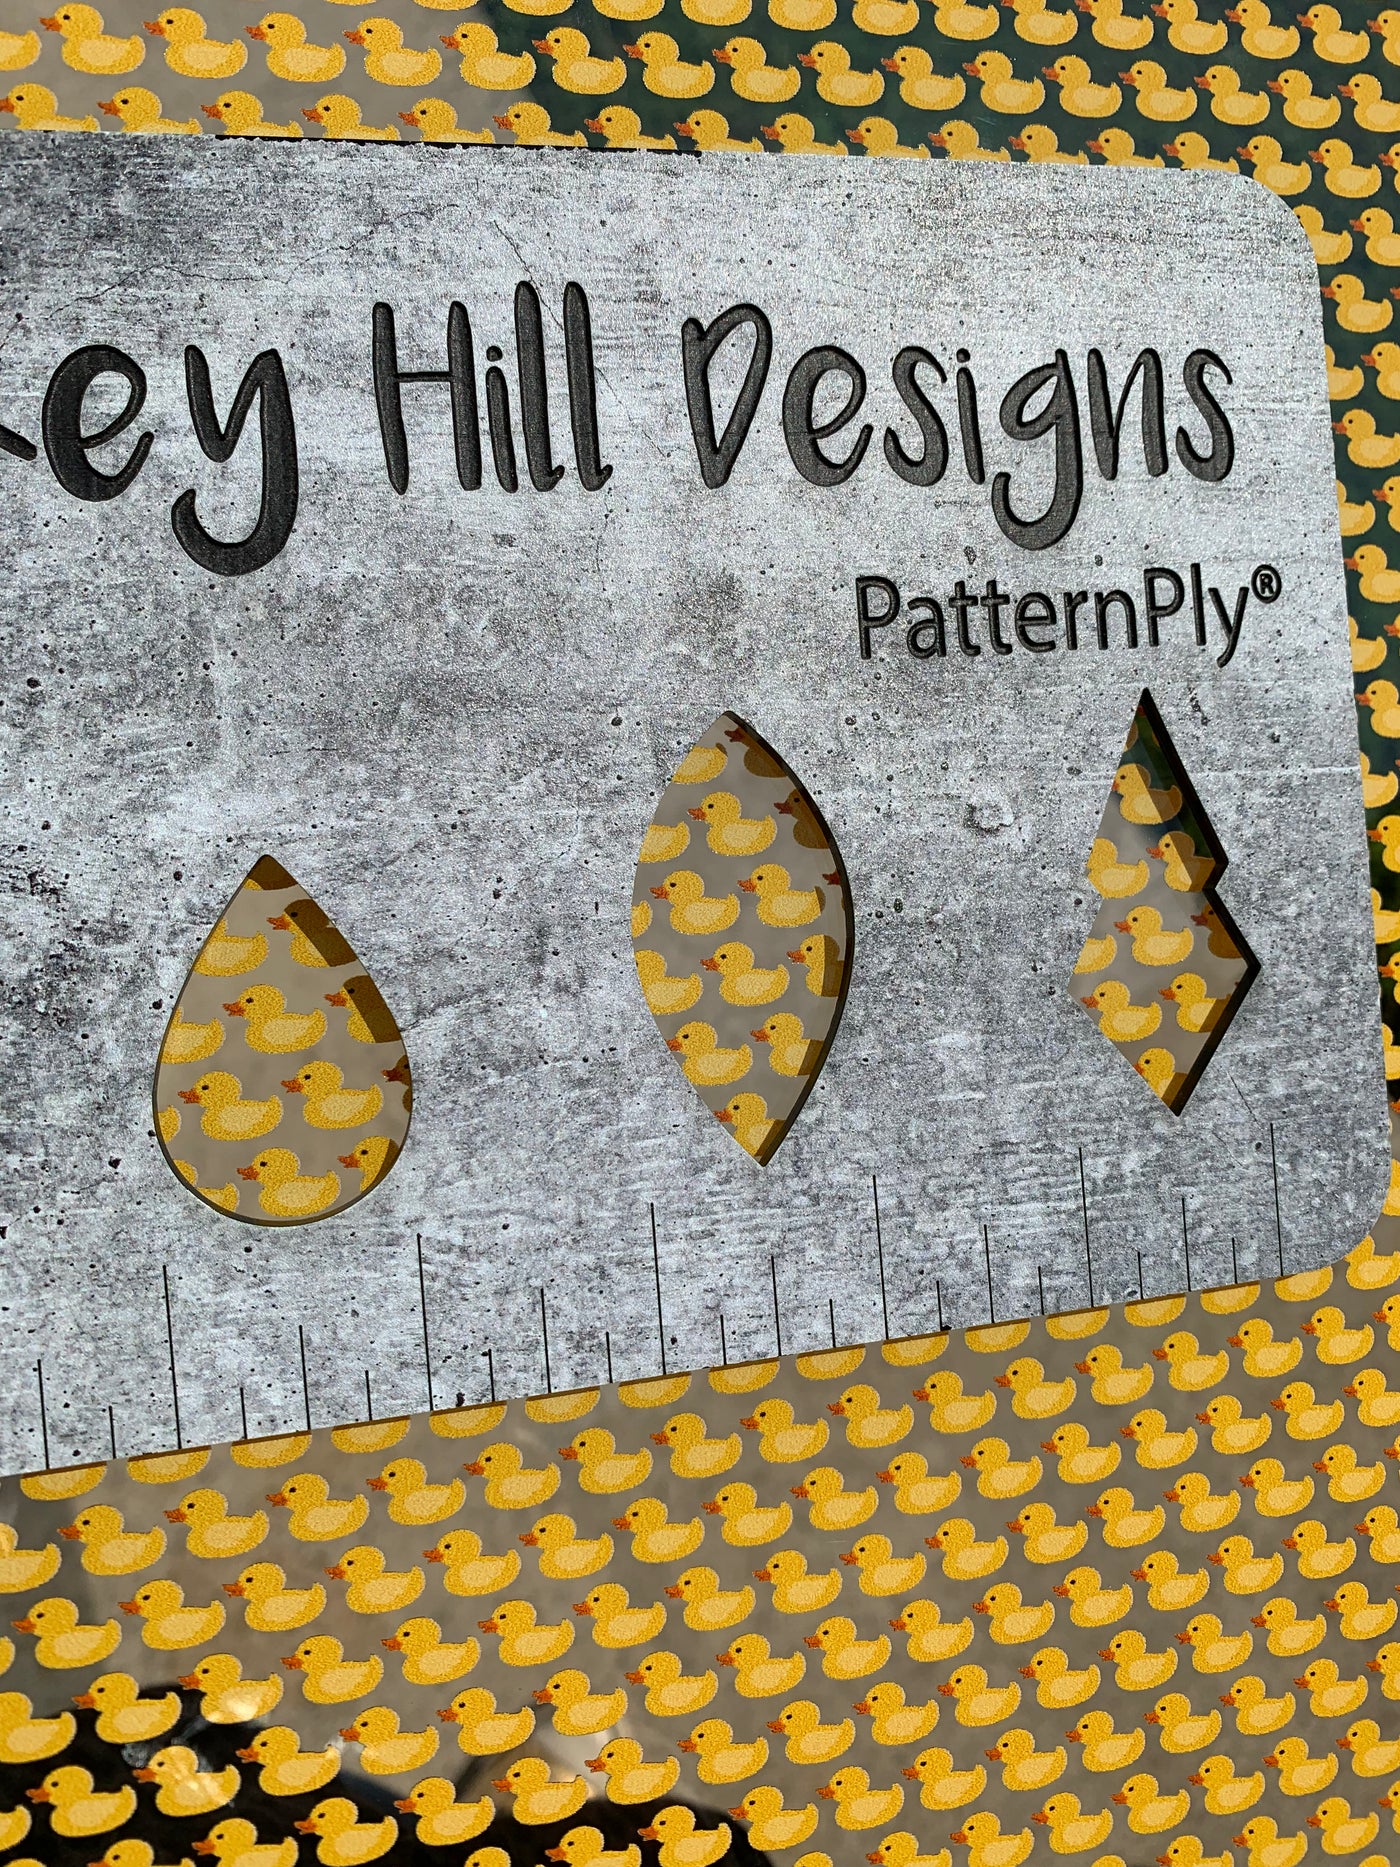 PatternPly® Scattered Rubber Ducks